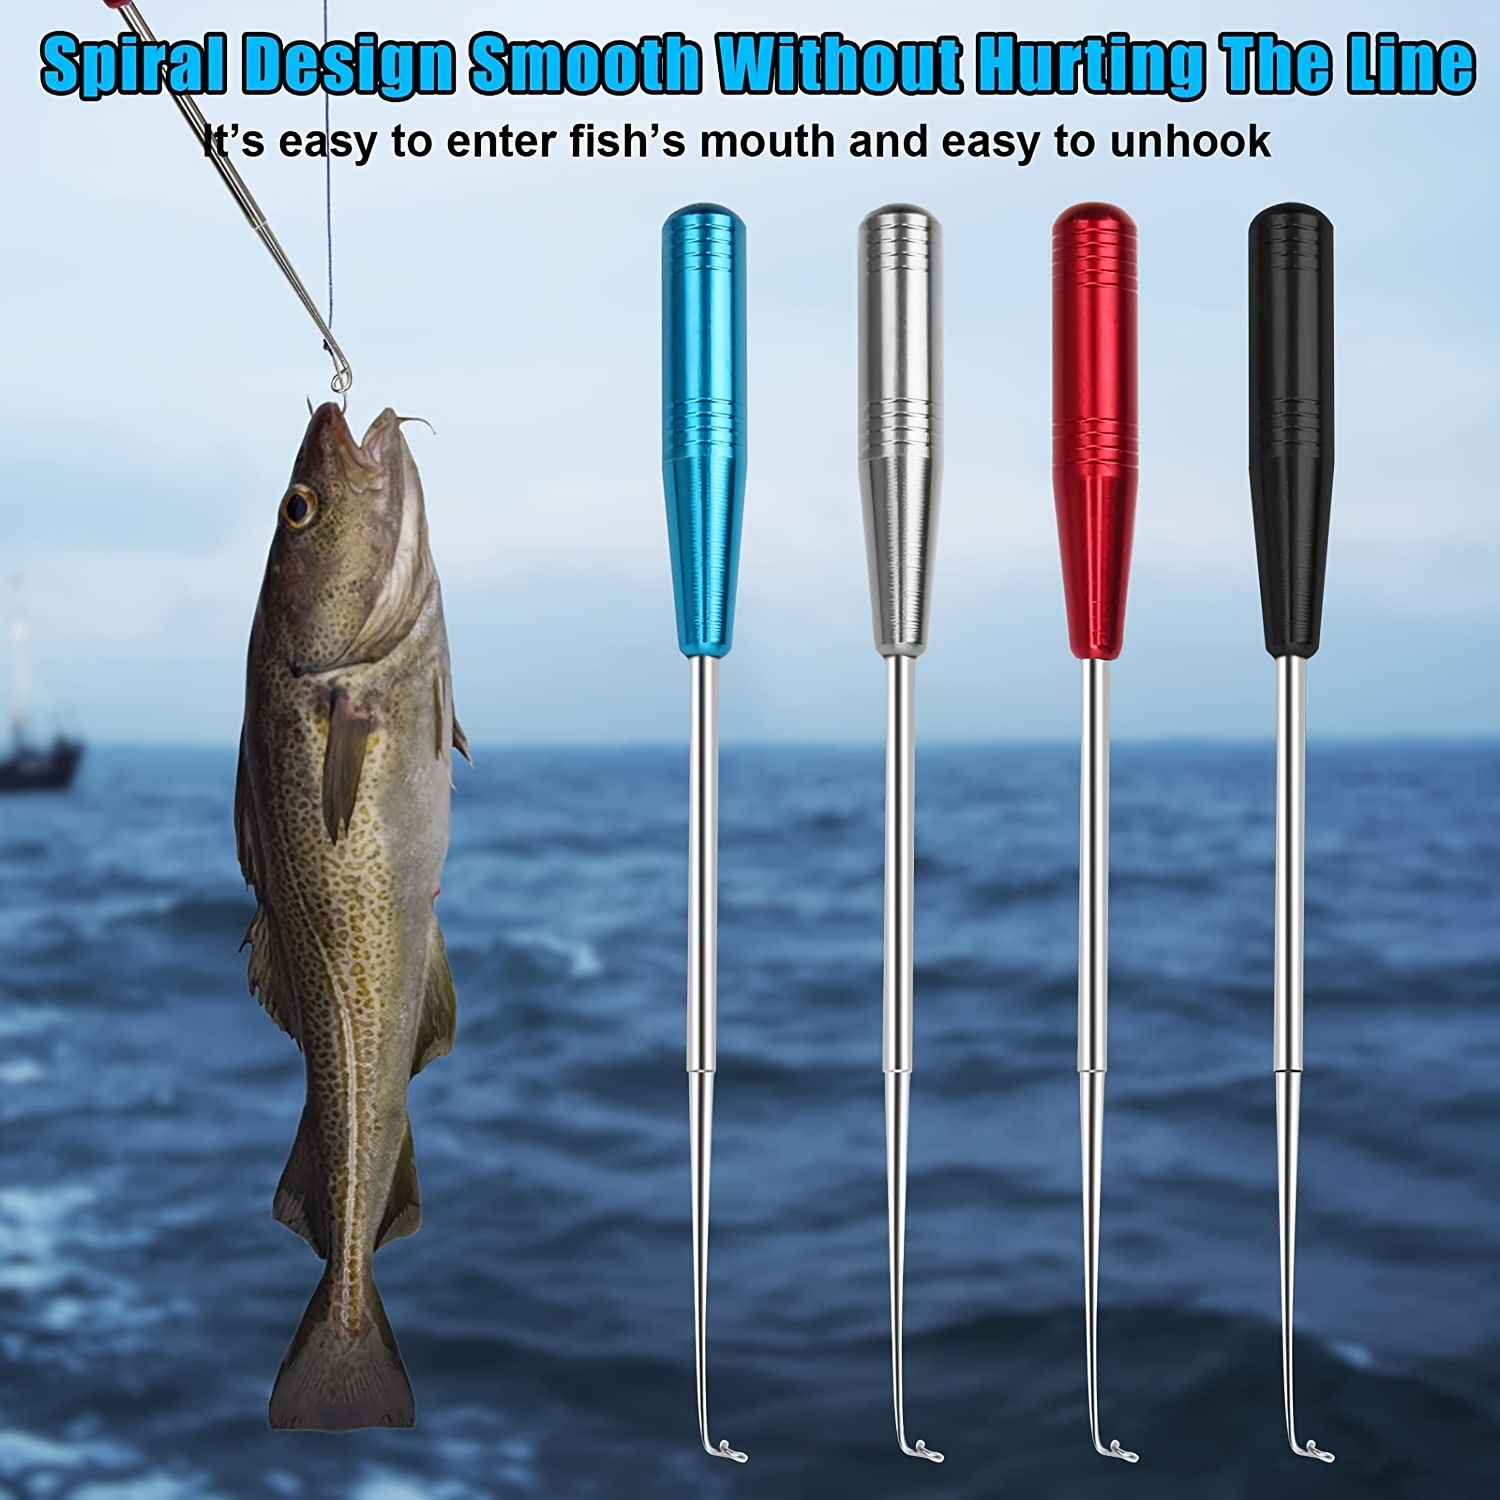 4PCS Fishing Hook Quick Removal Device, Easy Fish Hook Remover